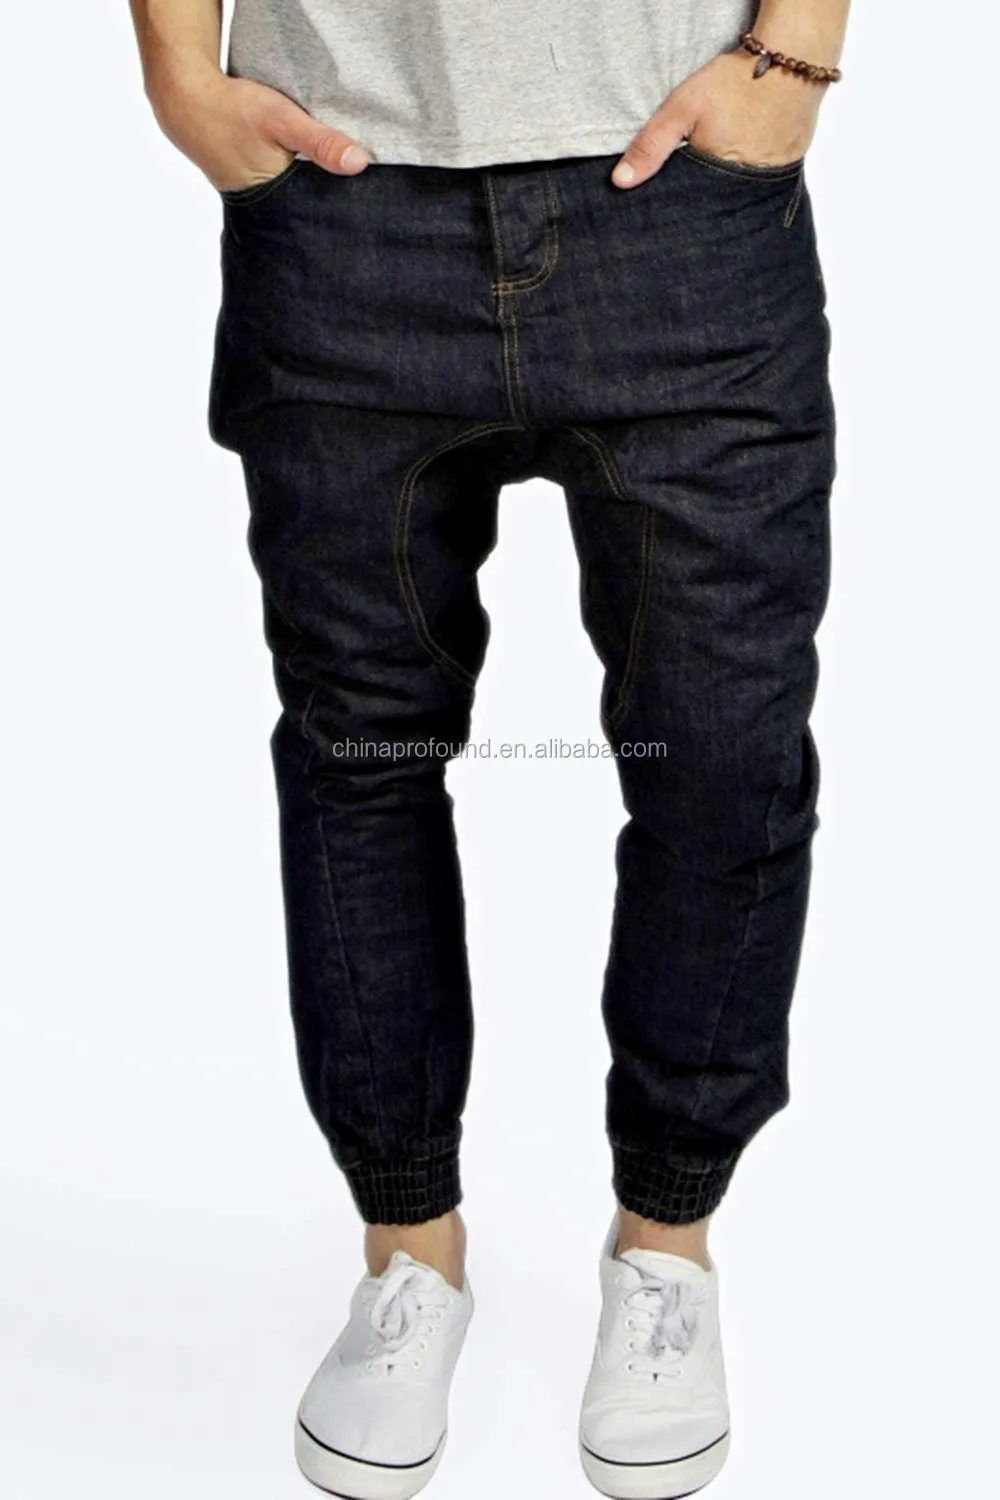 balloon fit pant jeans